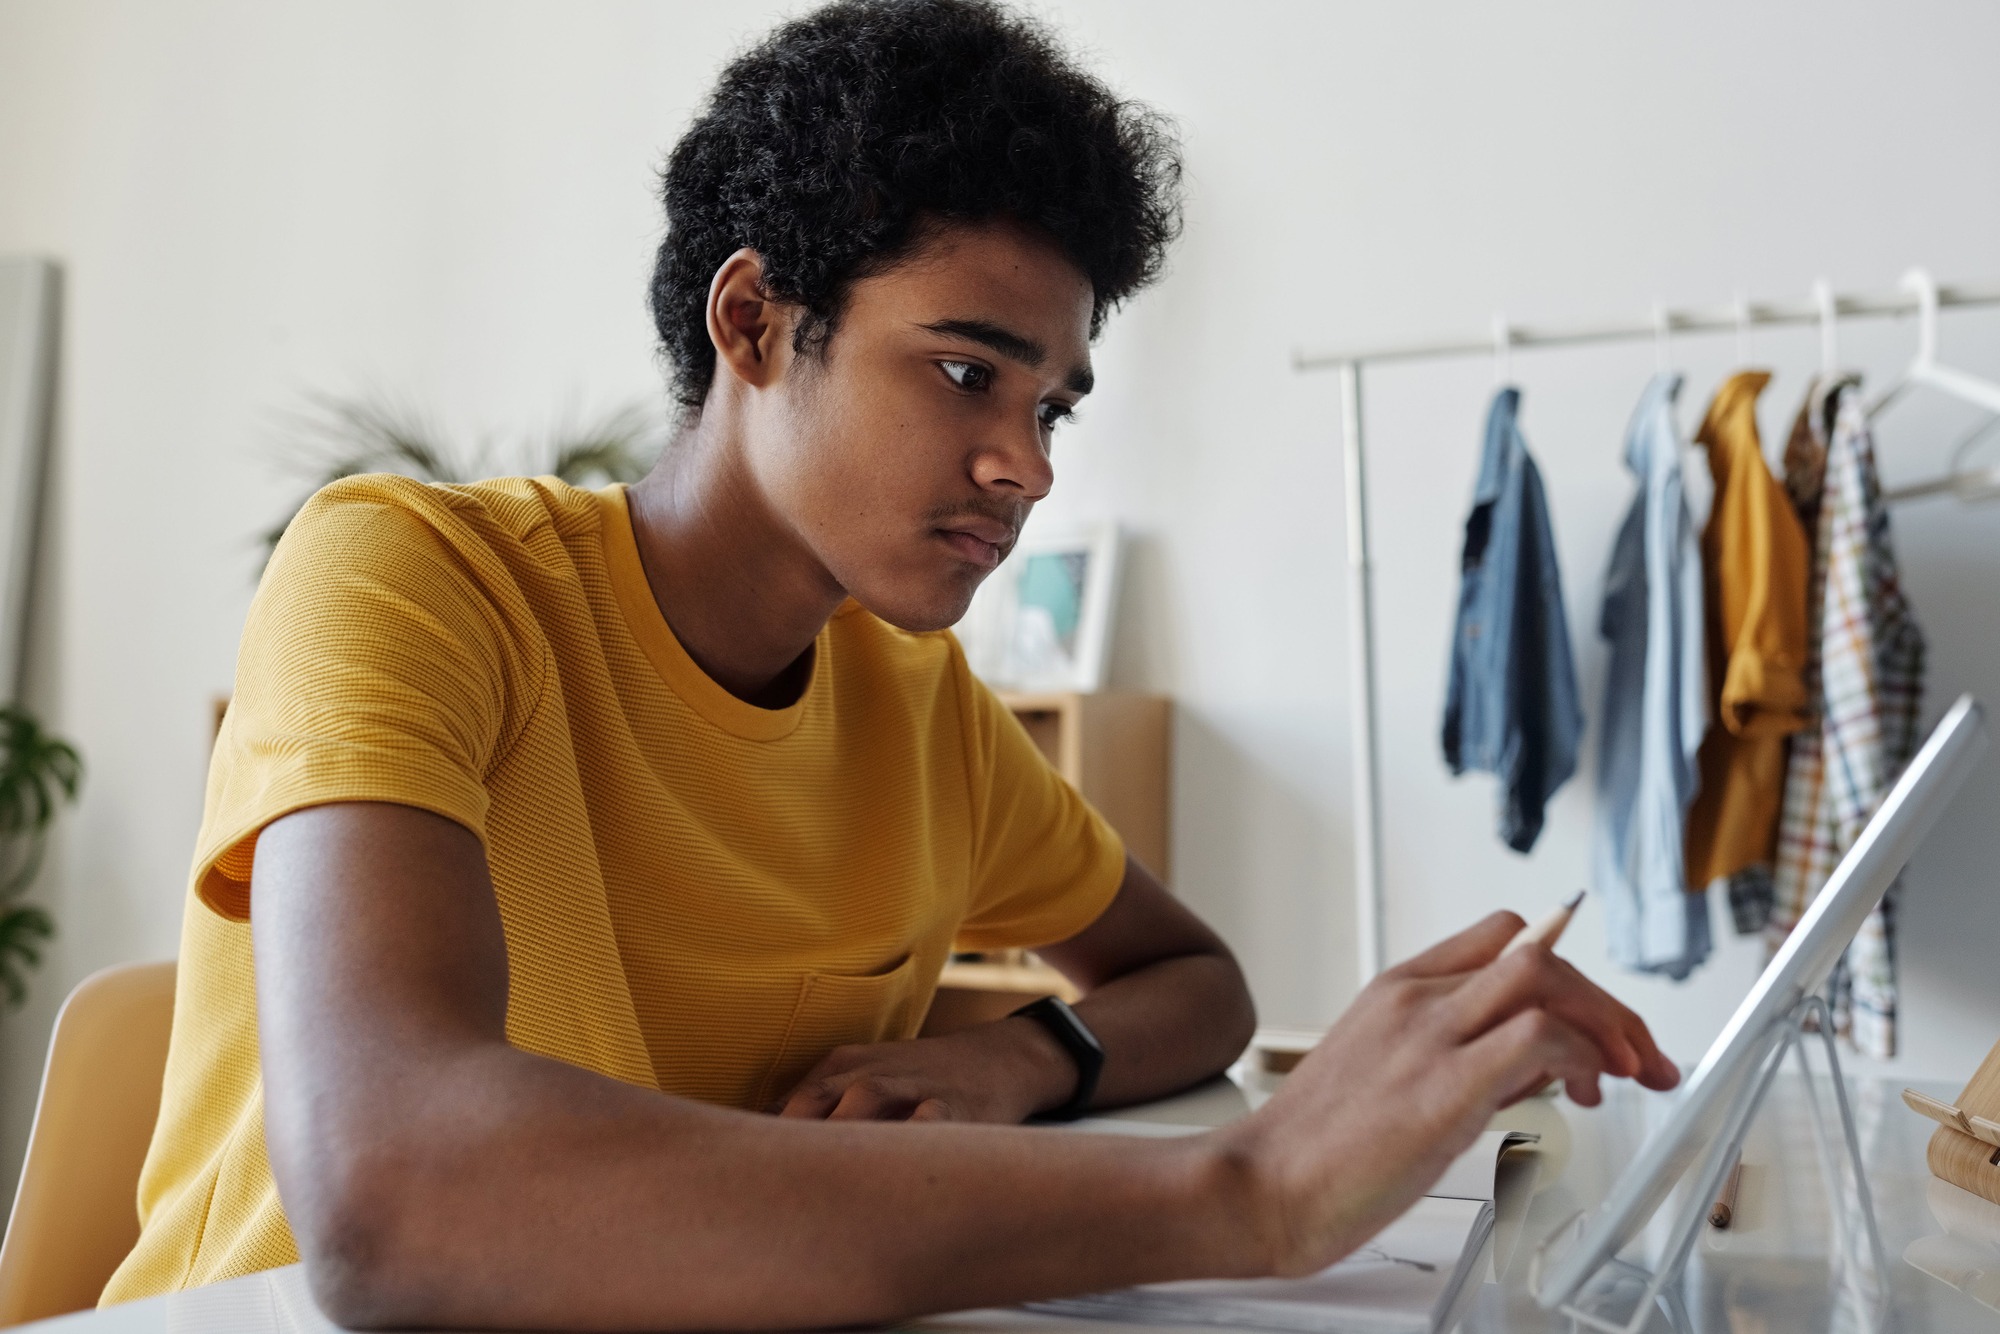 African American Teen using a laptop or tablet.